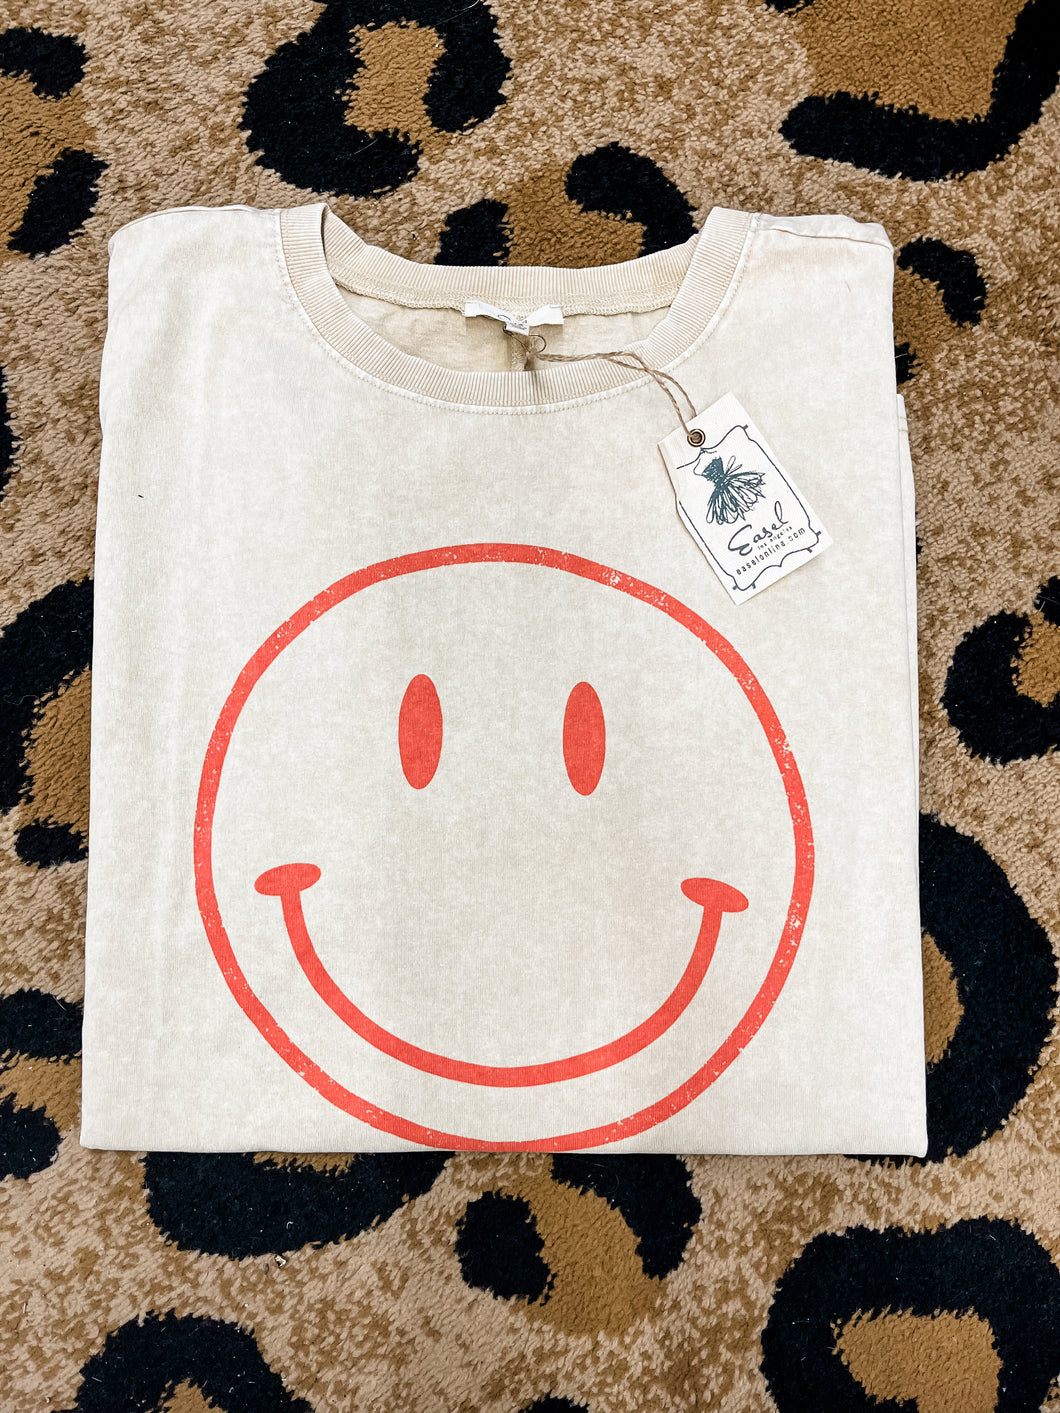 smiley face t-shirt